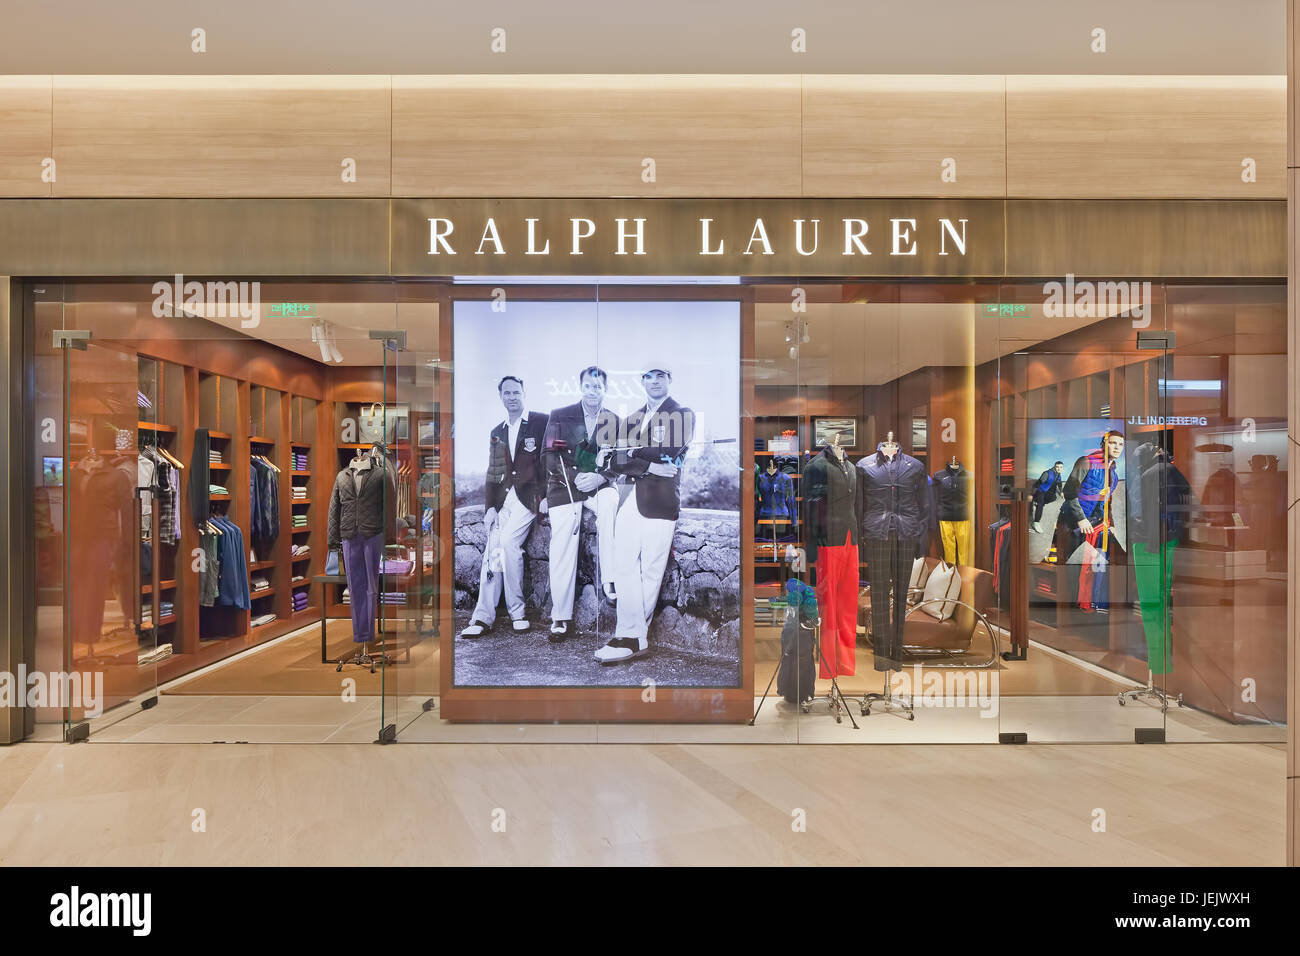 BEIJING-JANUARY. 25, 2014. Ralph Lauren outlet. Recent years China was the engine of the world’s luxury goods industry, but a weakening in economic gr Stock Photo